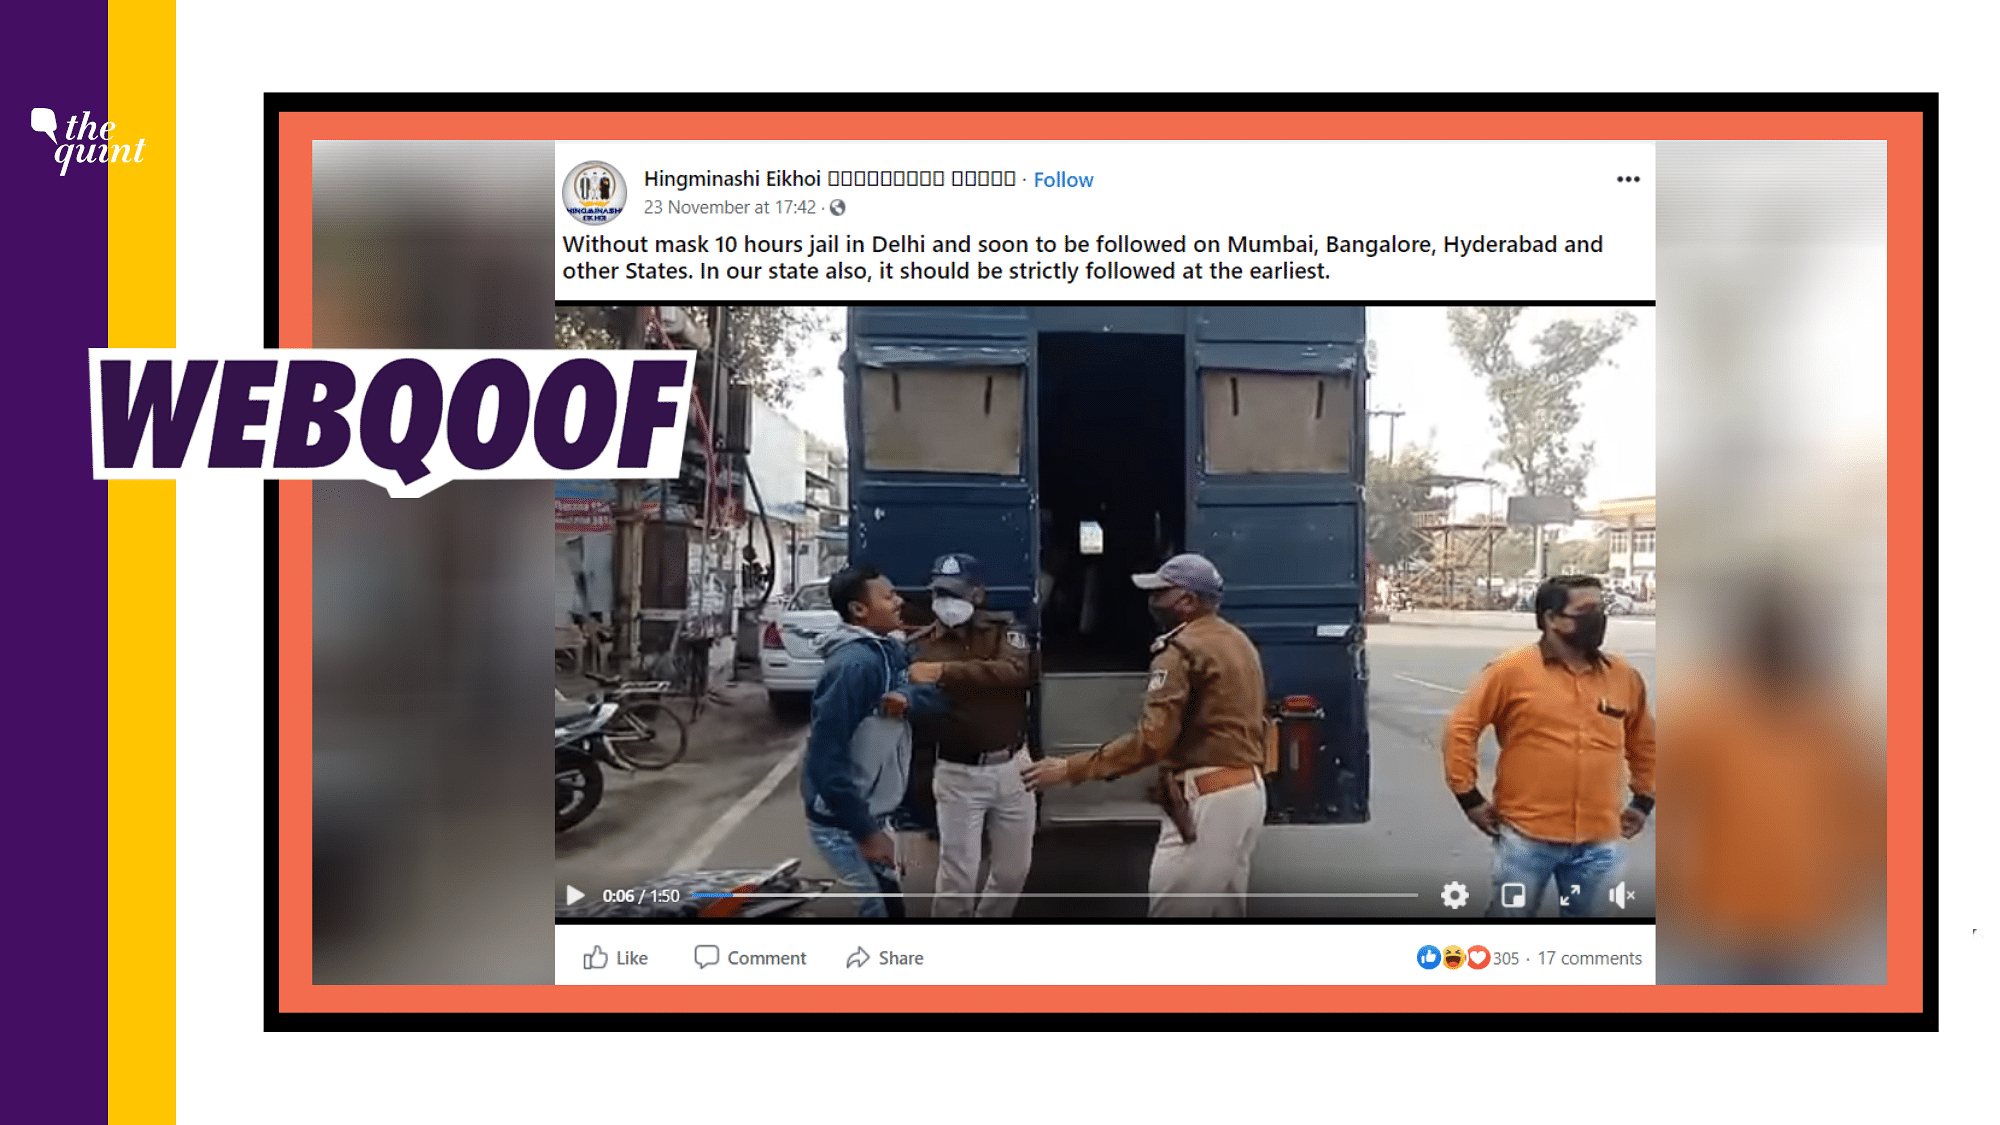 A video of police action against those not wearing a mask from Ujjain has falsely gone viral as a video from Delhi.